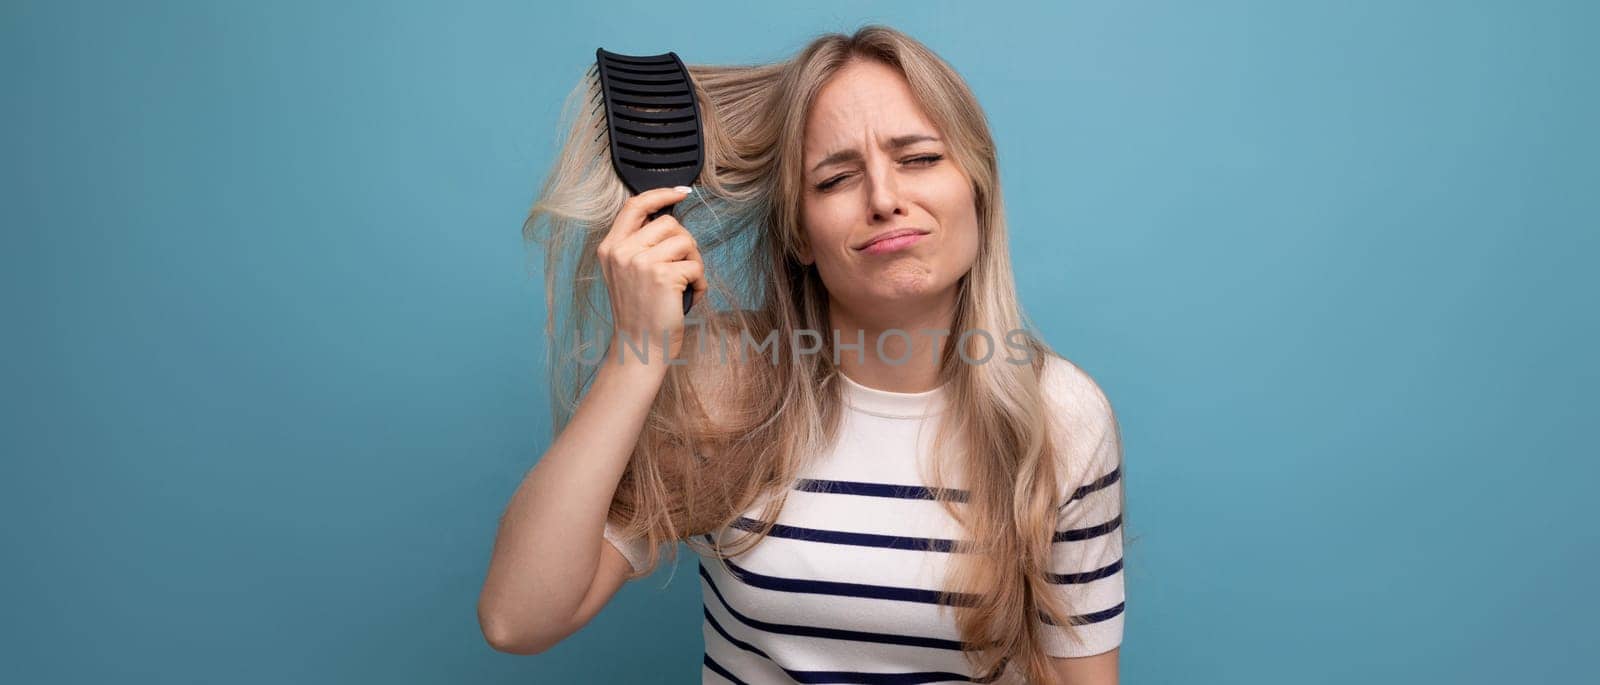 horizontal photo of a sad upset blond young woman with a hairbrush in her hands on a blue background.